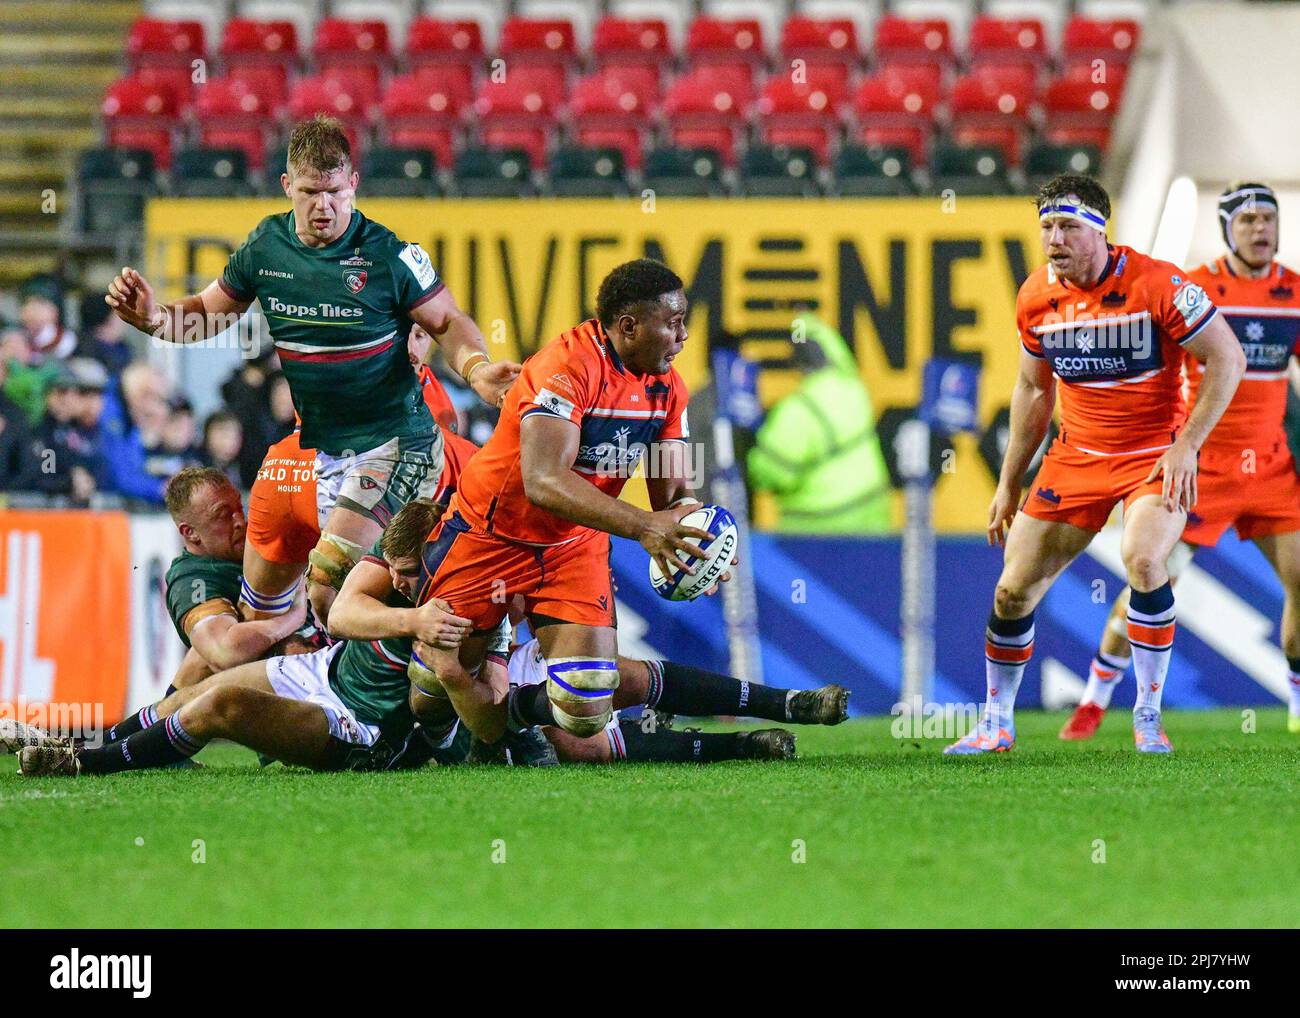 Leicester Tigers Rugby v Edinburgh Rugby Team at the Mattioli Stadium in Leicester, UK on 31 March 2023.  Viliame Mata (Edinburgh) tackled at the Mattioli Rugby Stadium, Leicester, Uk  Credit: Mark Dunn/Alamy Live News Stock Photo